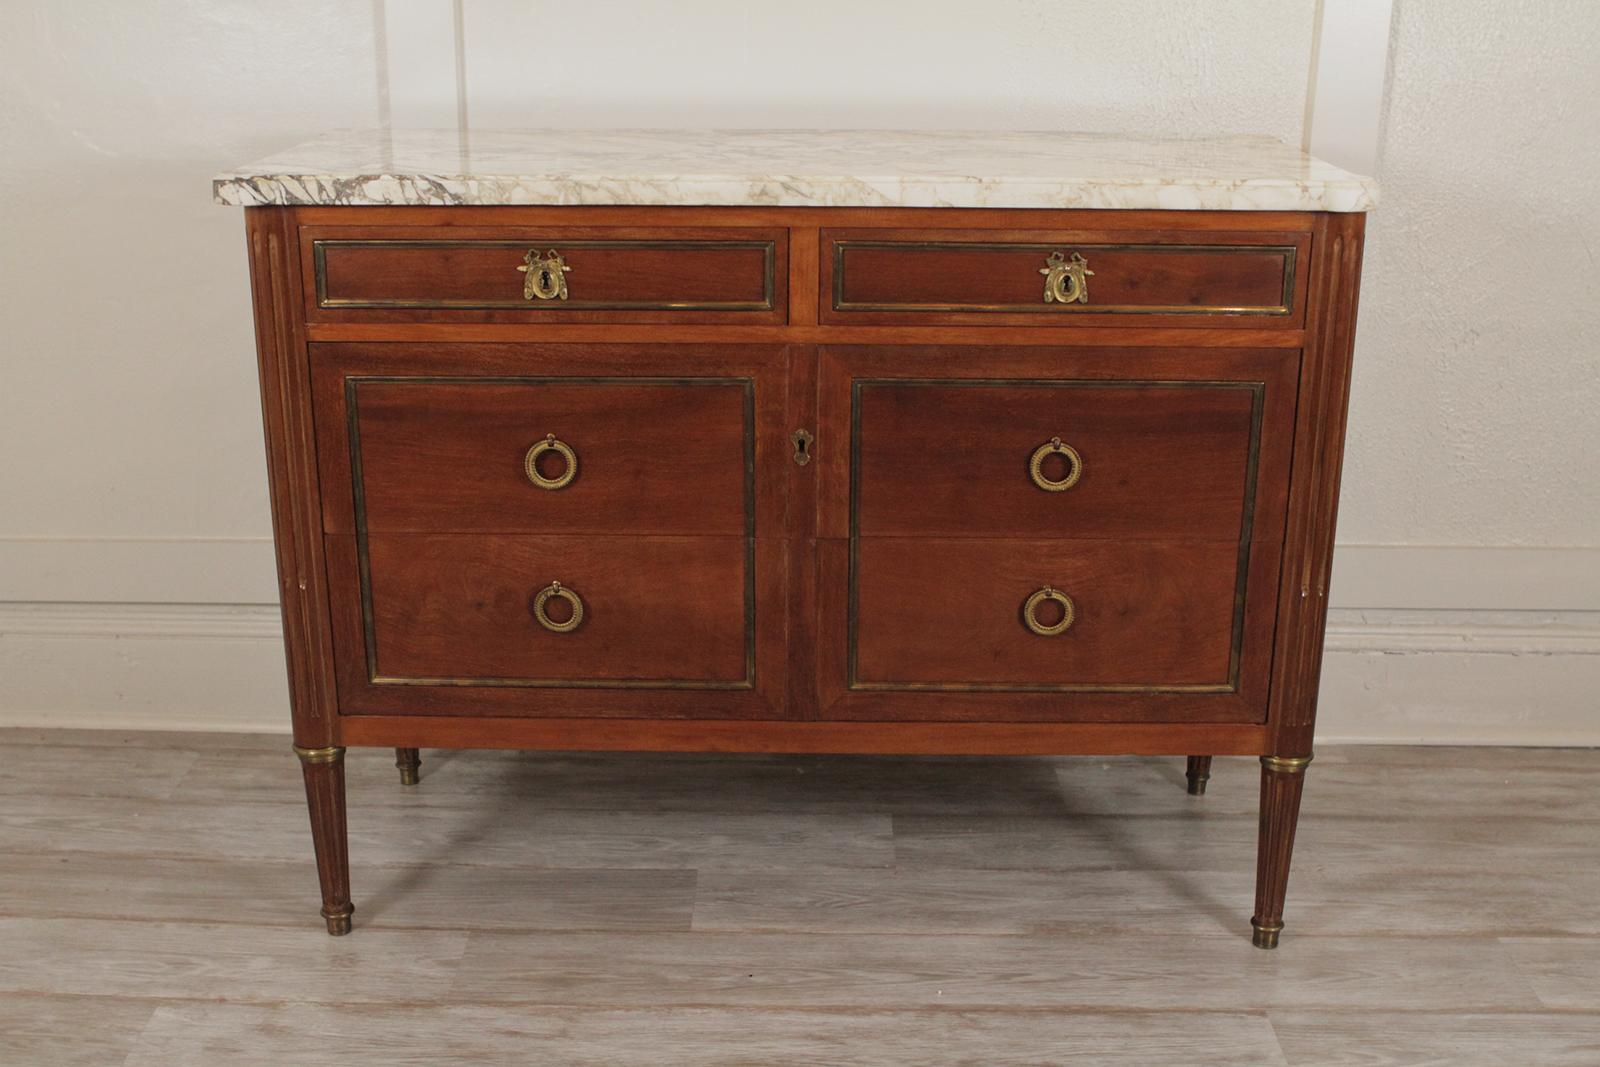 French marble-top mahogany brass inlaid console/cabinet, circa mid-20th century.
Dimensions 34.5